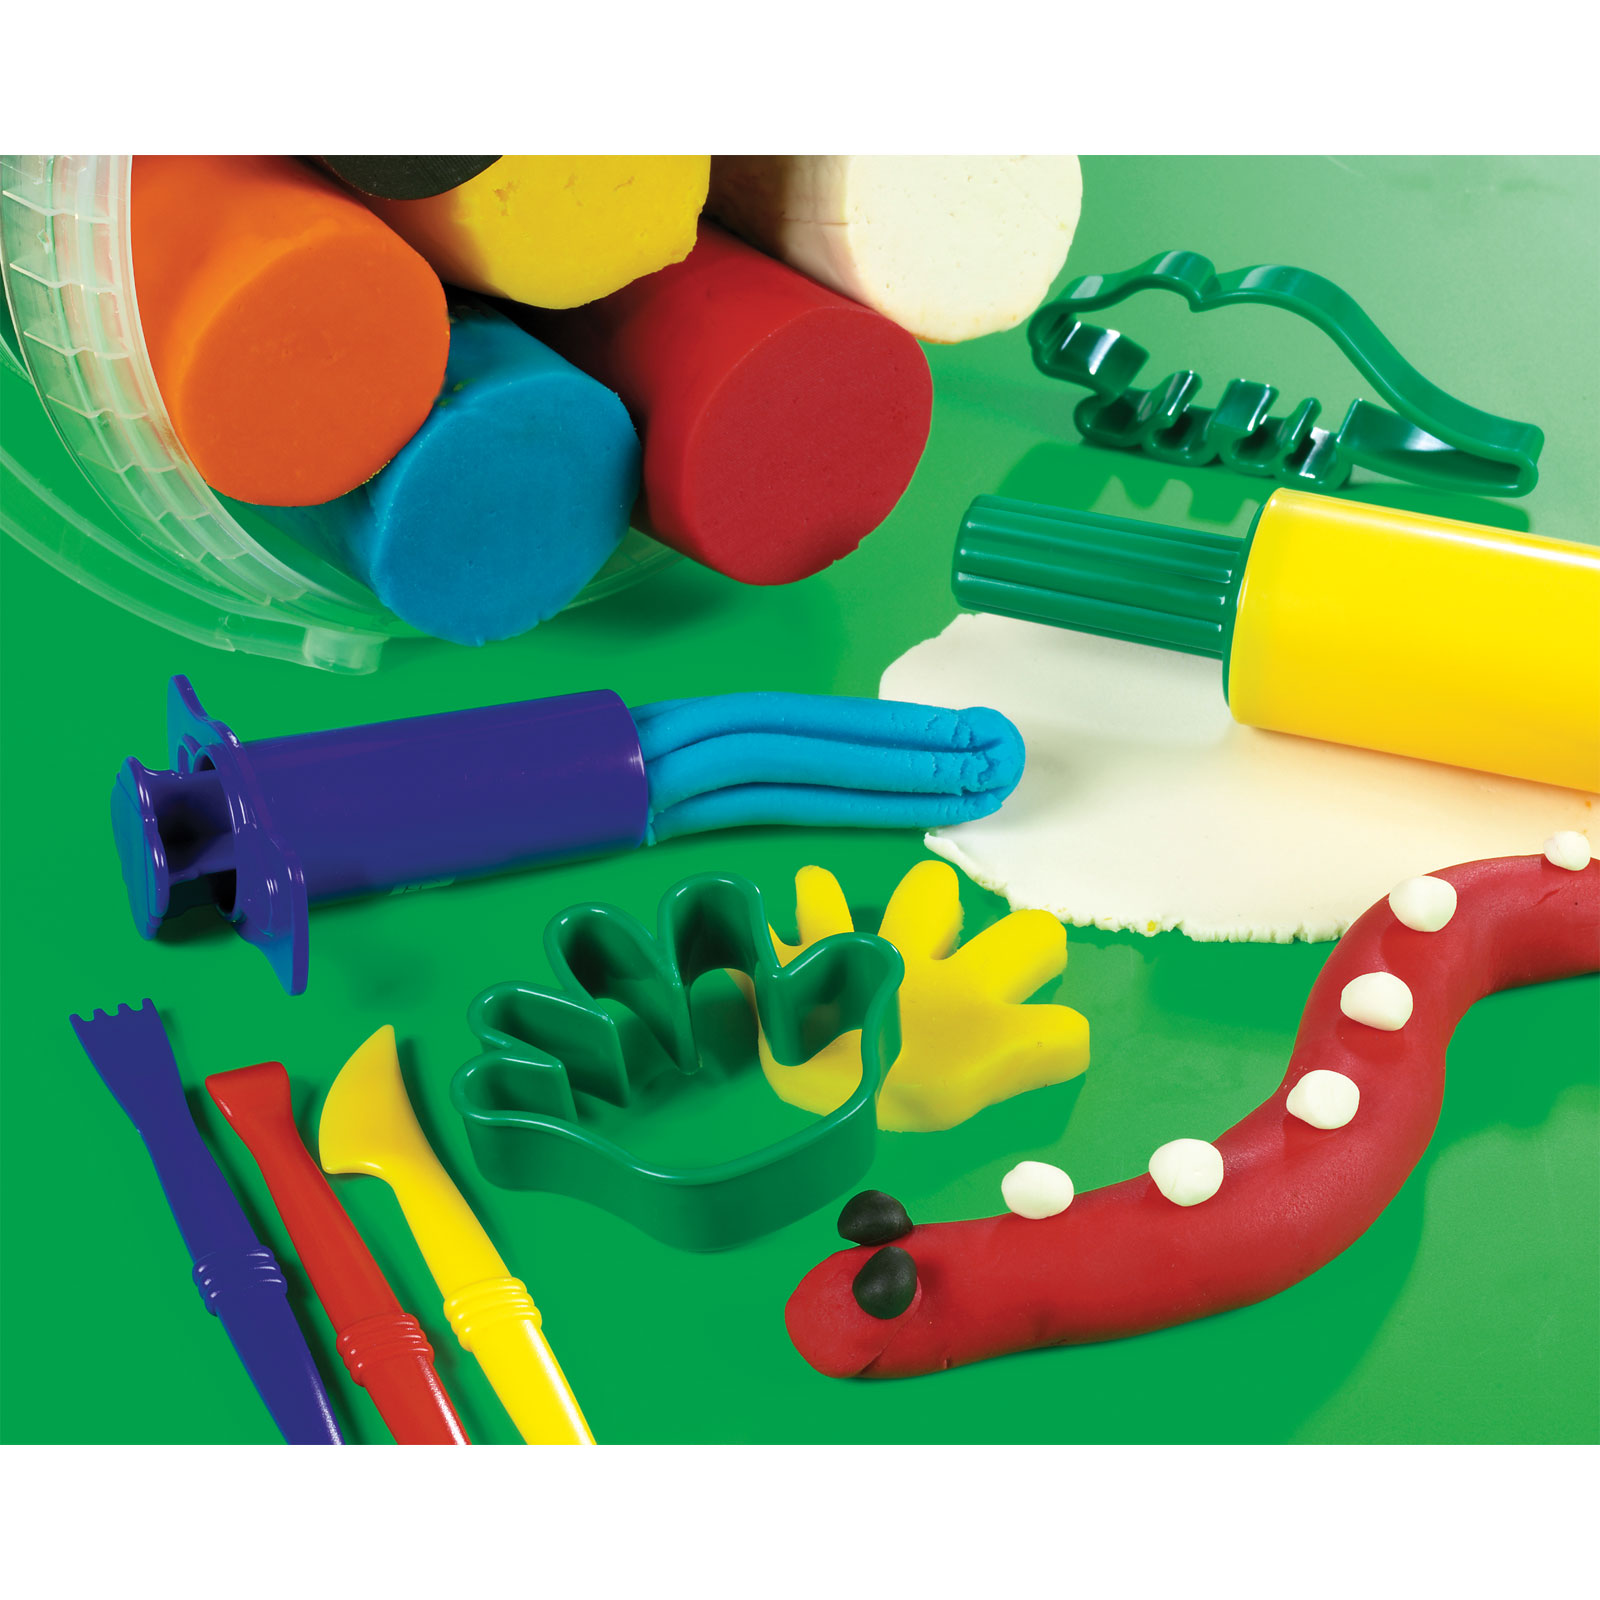 Play-Doh Soft Pack Resealable with Shape Cutter Varied Colors